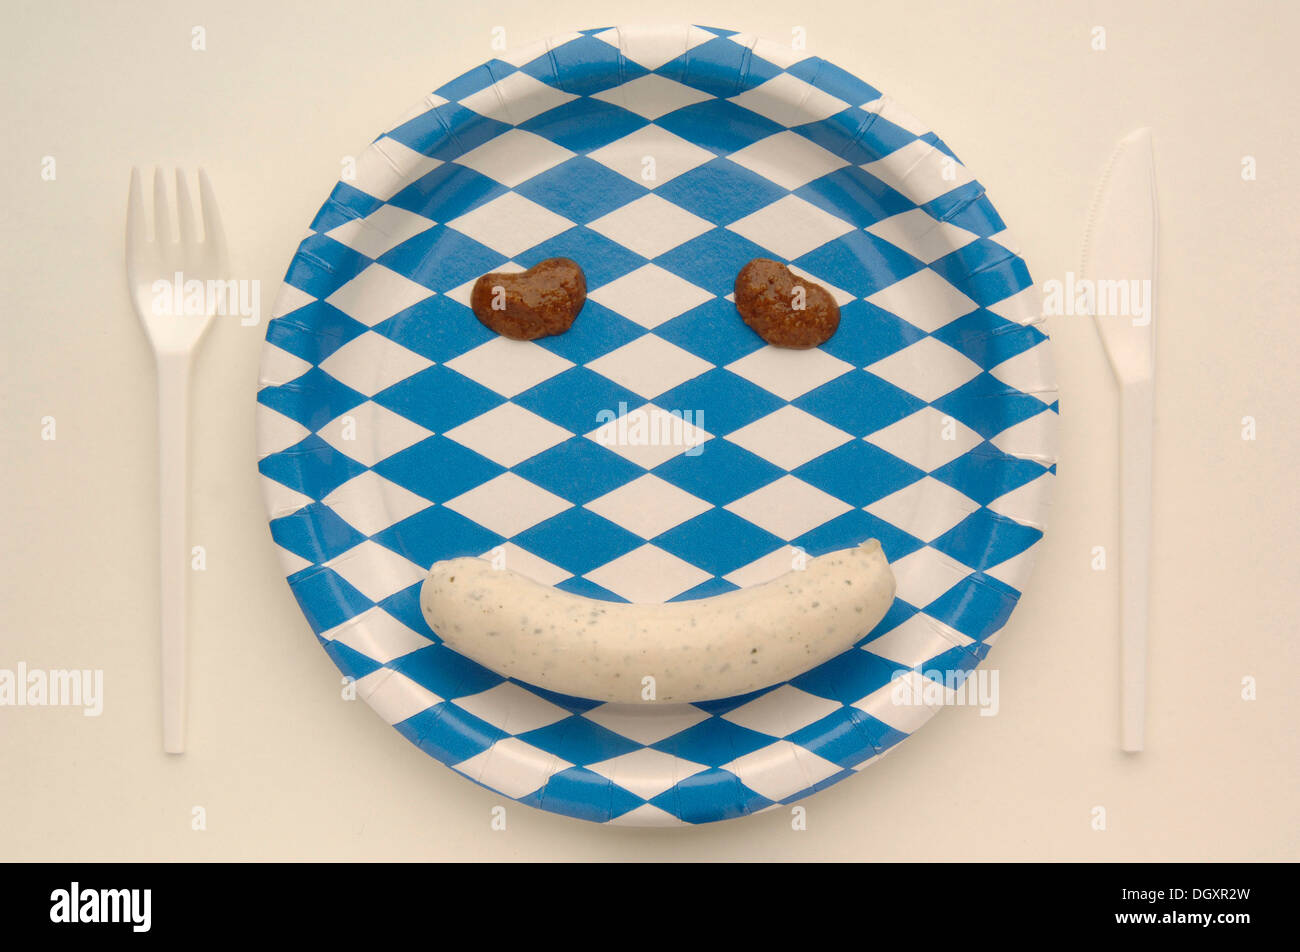 Weisswurst veal sausage making a face with mustard on a paper plate with the Bavarian diamond pattern Stock Photo